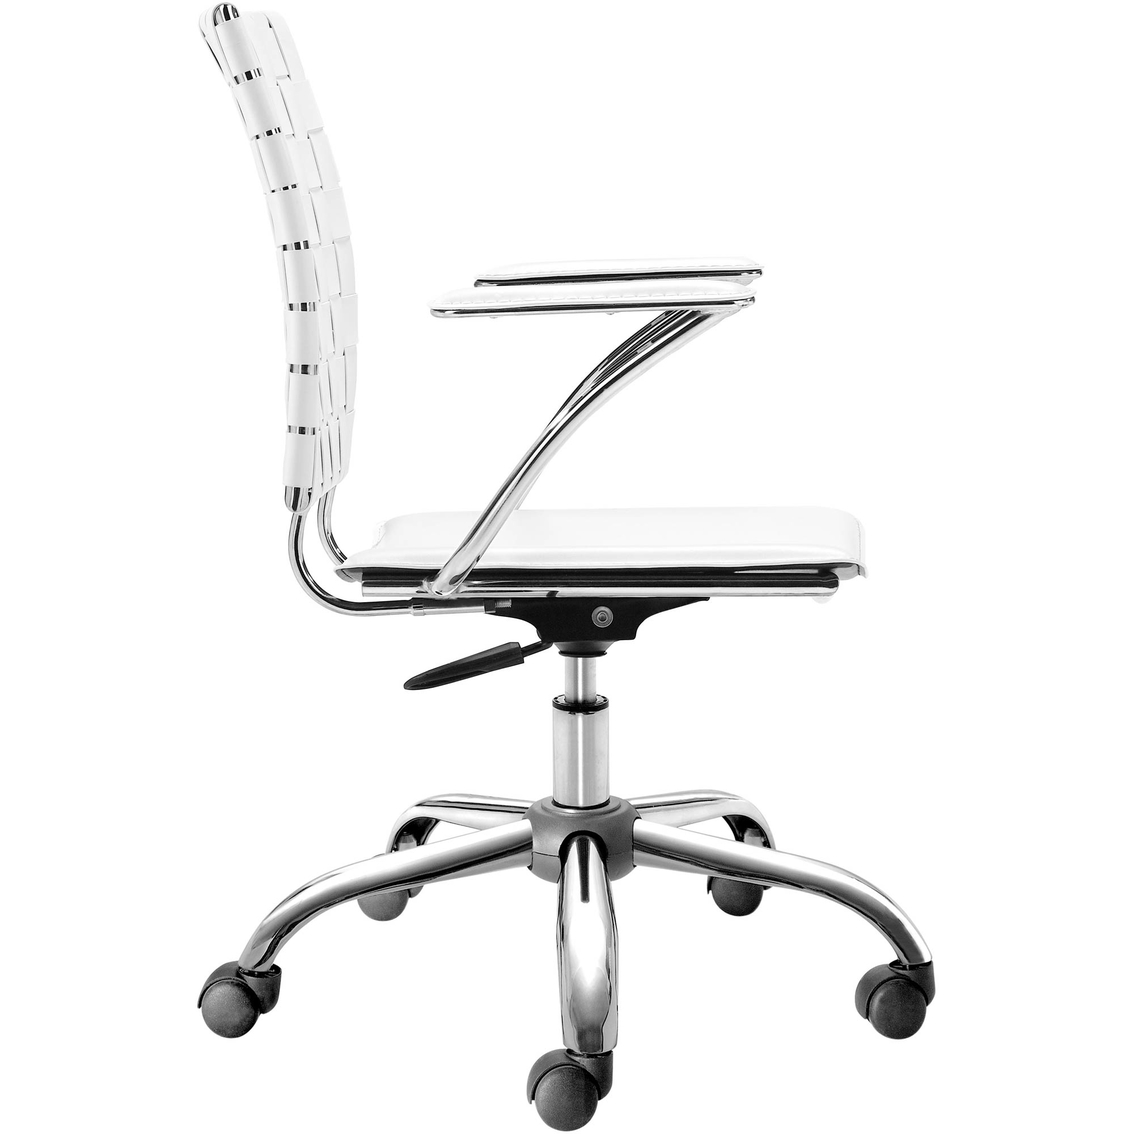 Zuo Criss Cross Office Chair - Image 3 of 4